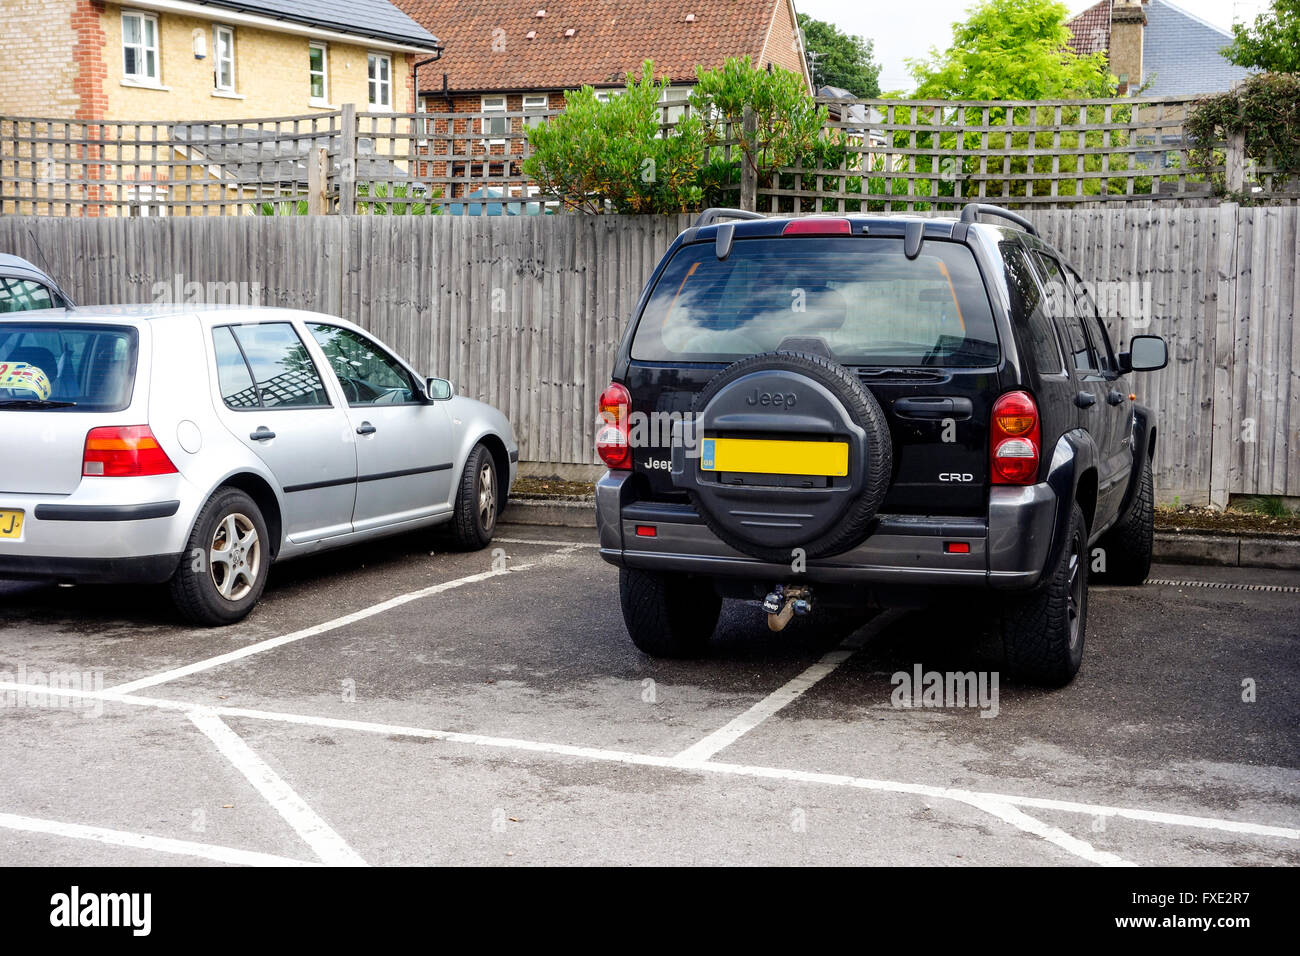 Inconsiderate parking in a car park, UK Stock Photo